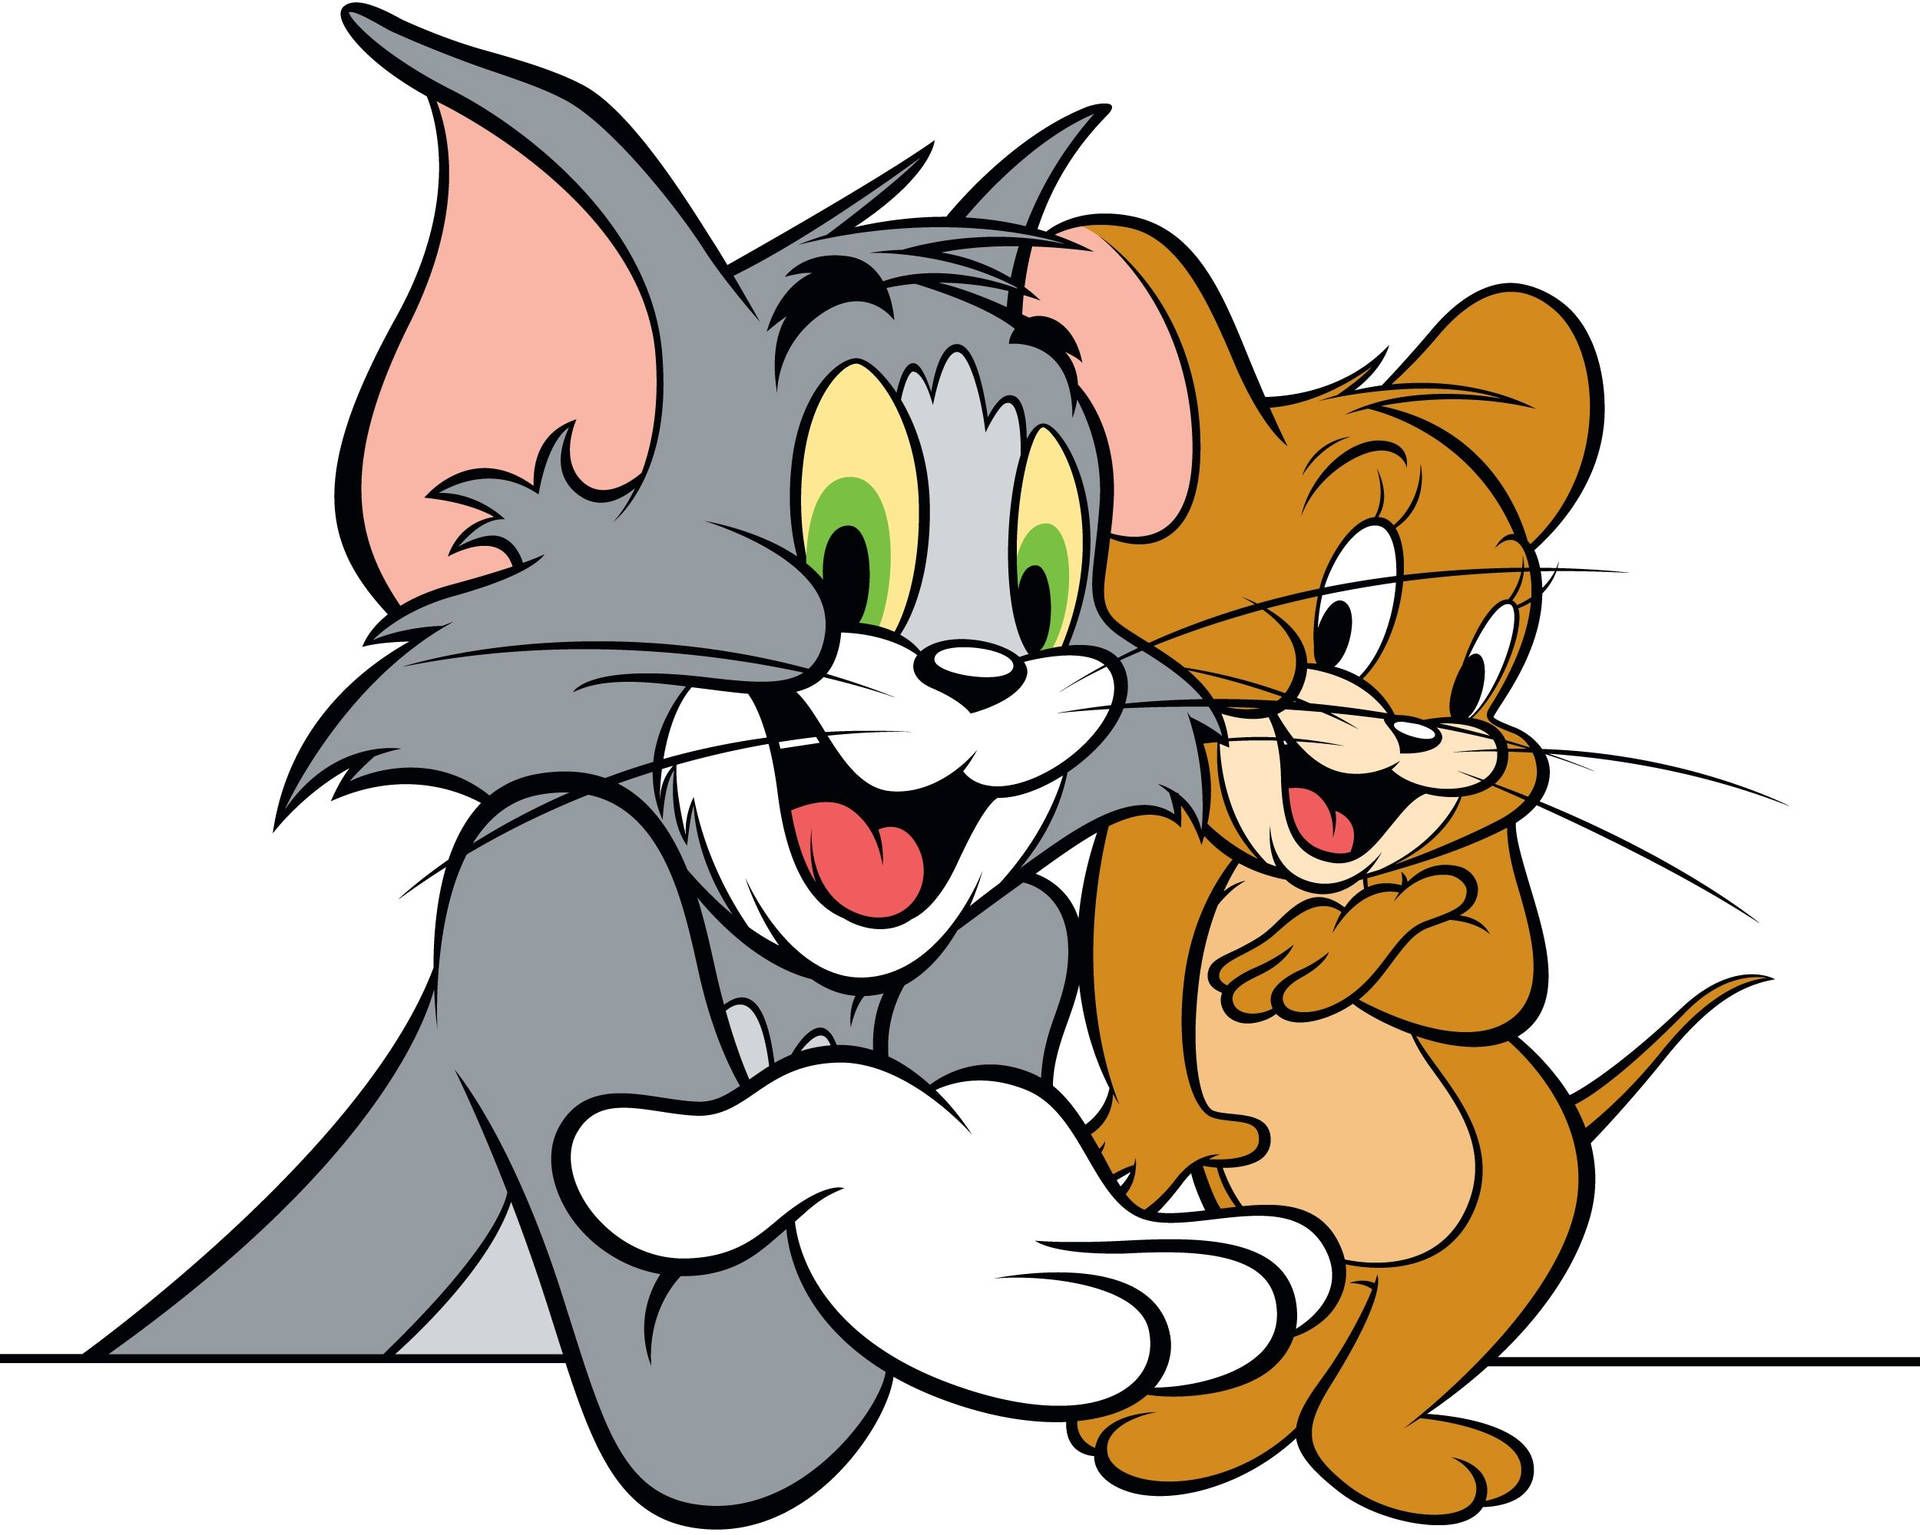 Tom and jerry cartoon character - Tom and Jerry